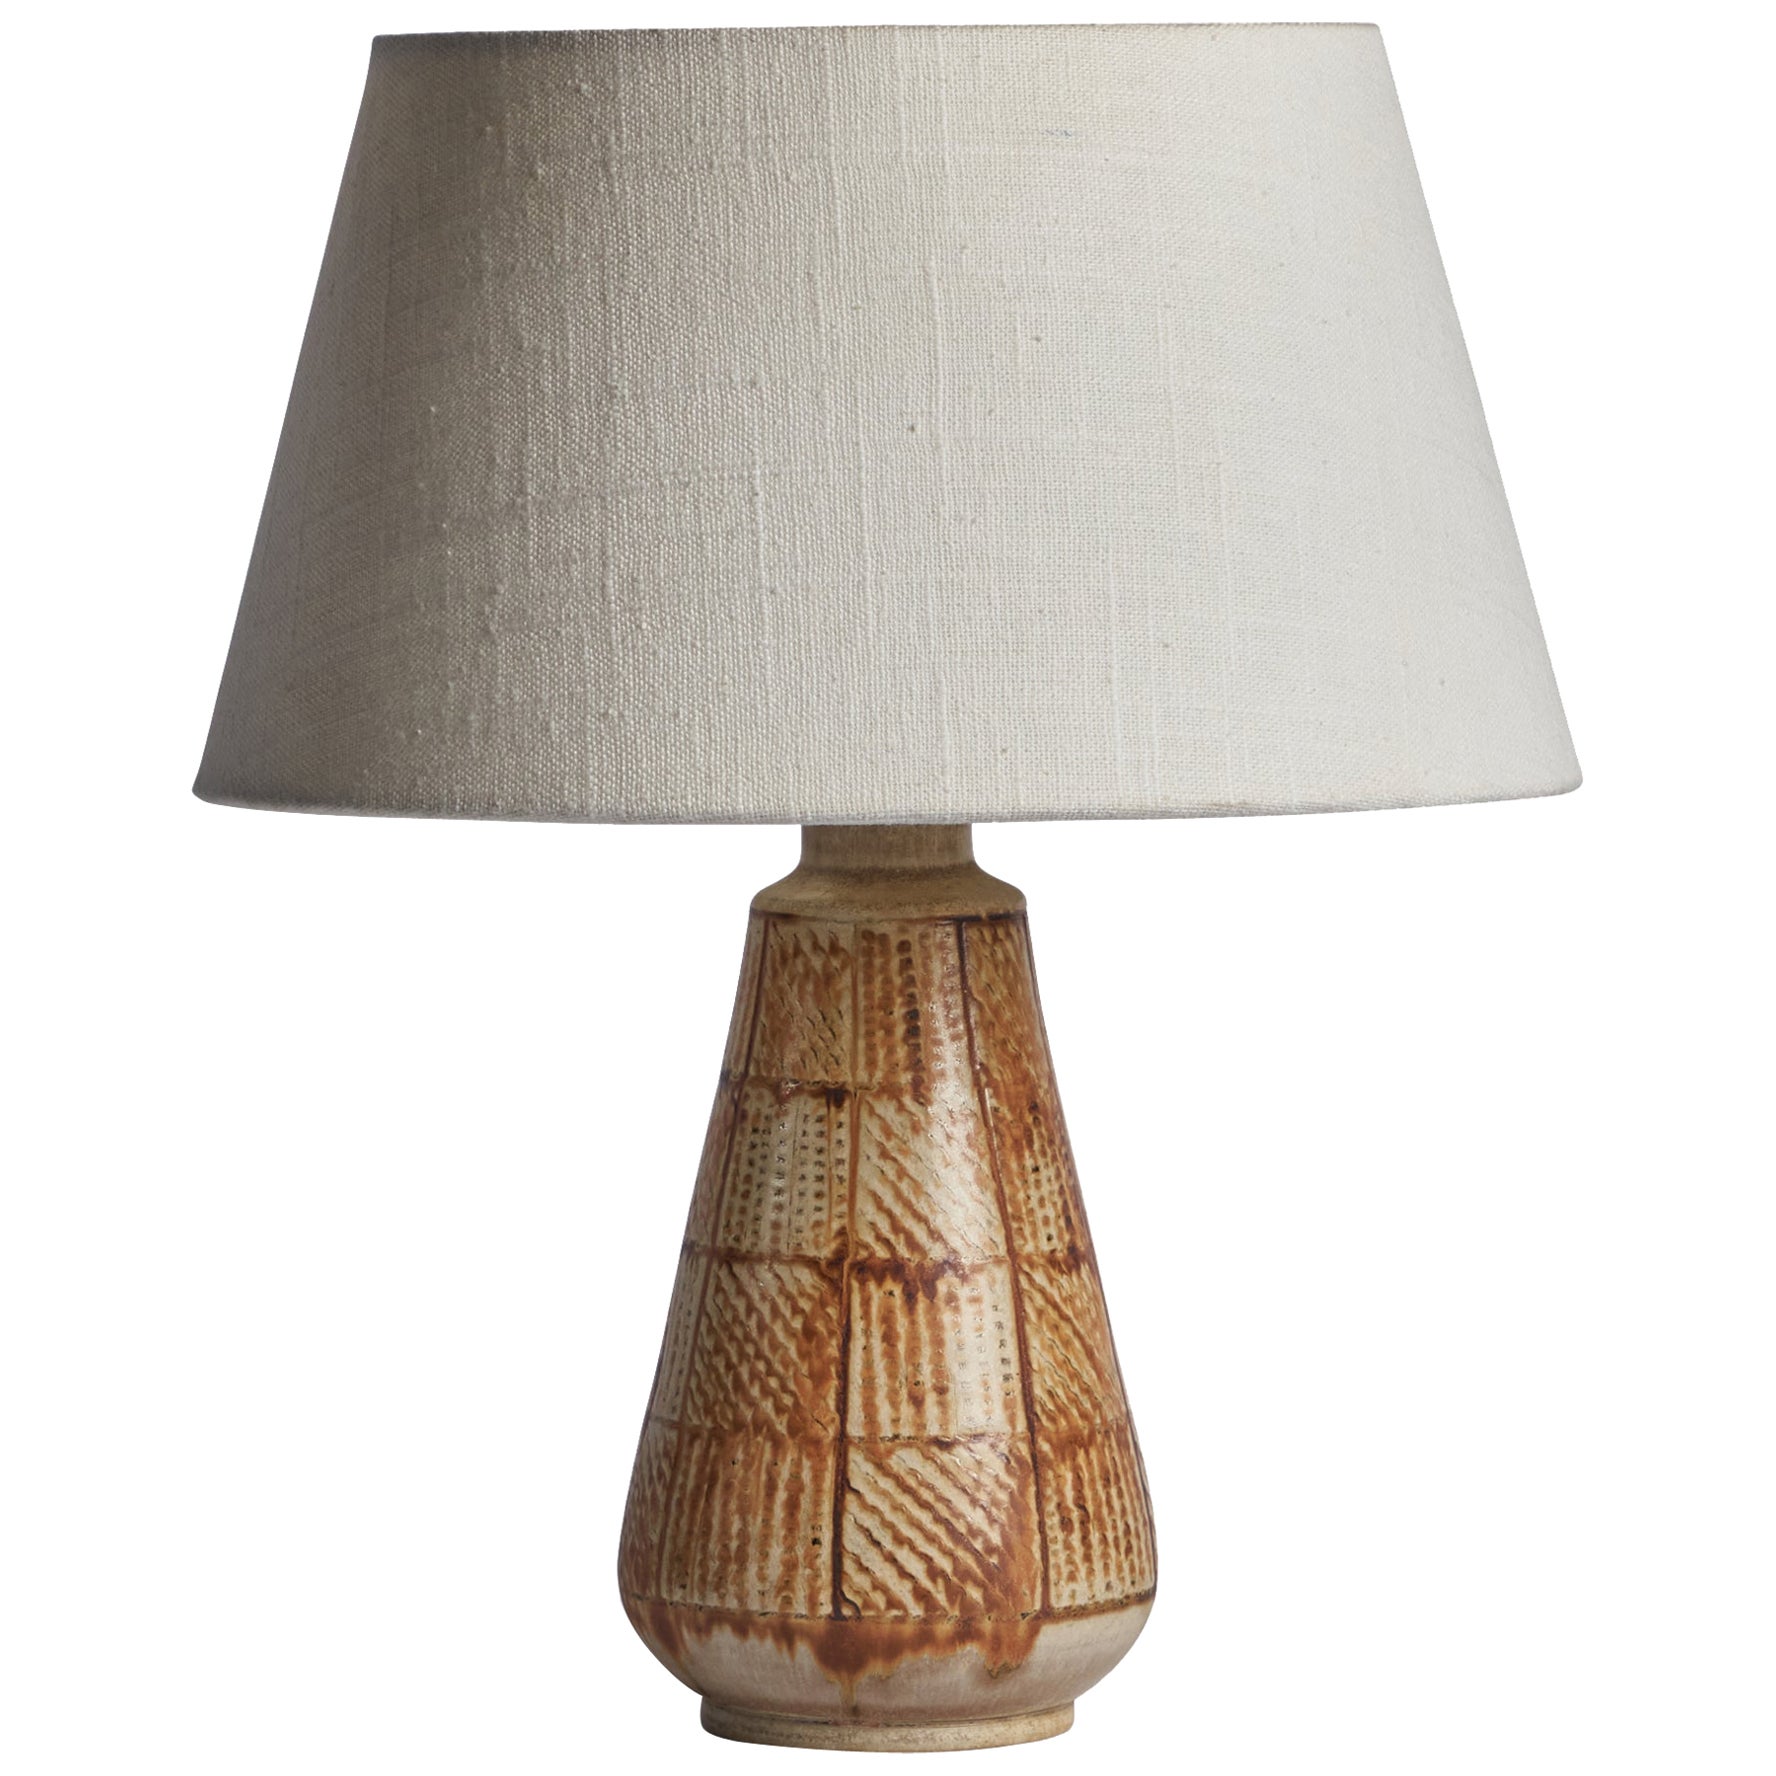 Andersson & Johansson, Table Lamp, Stoneware, Sweden, 1950s For Sale